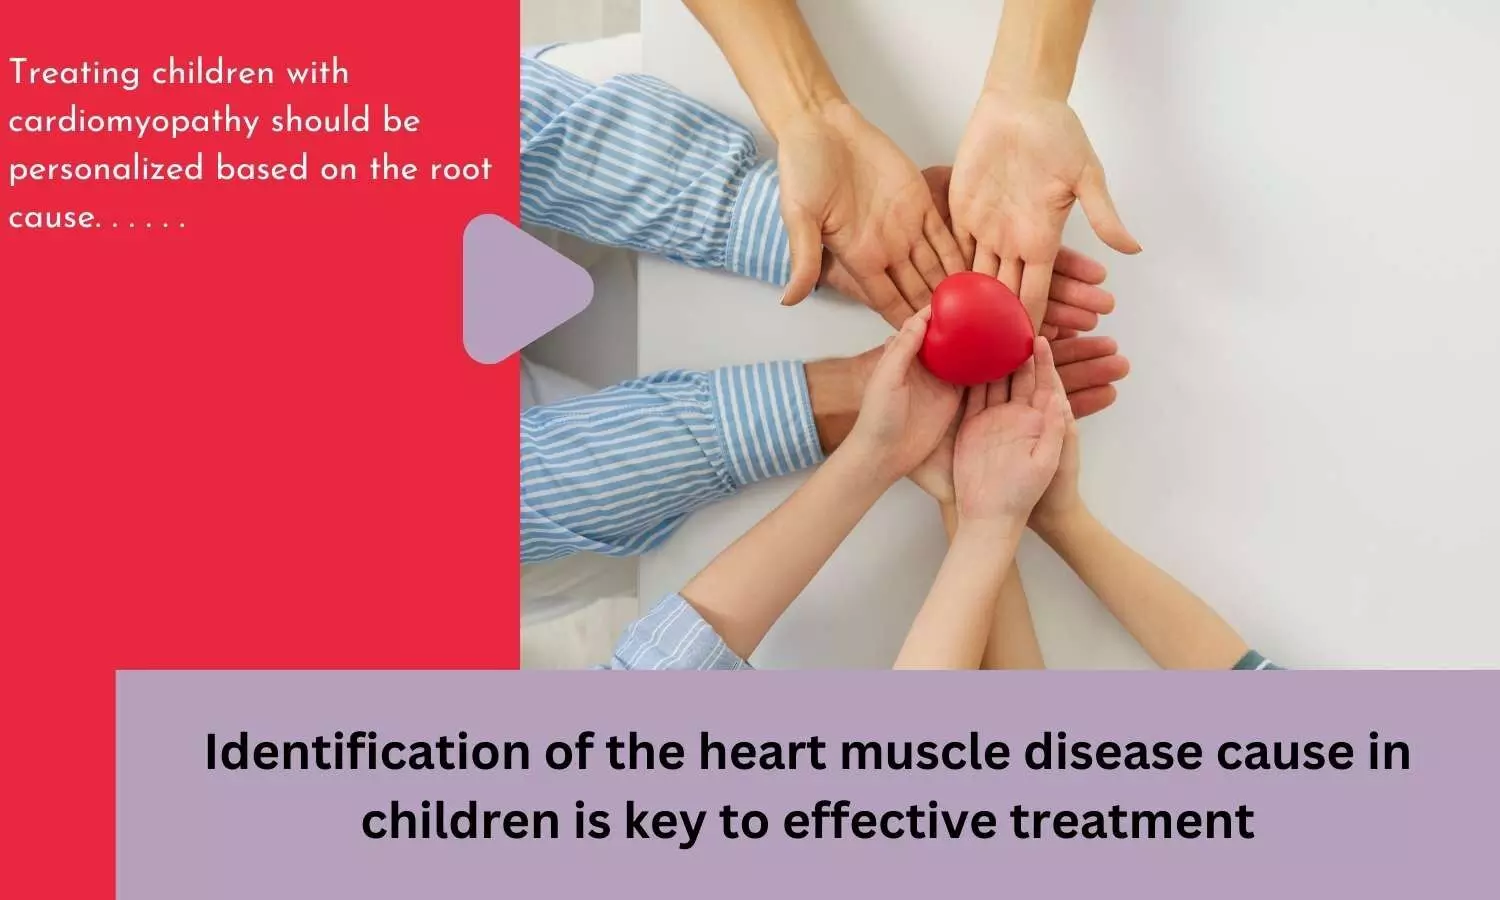 Identification of the heart muscle disease cause in children is key to effective treatment